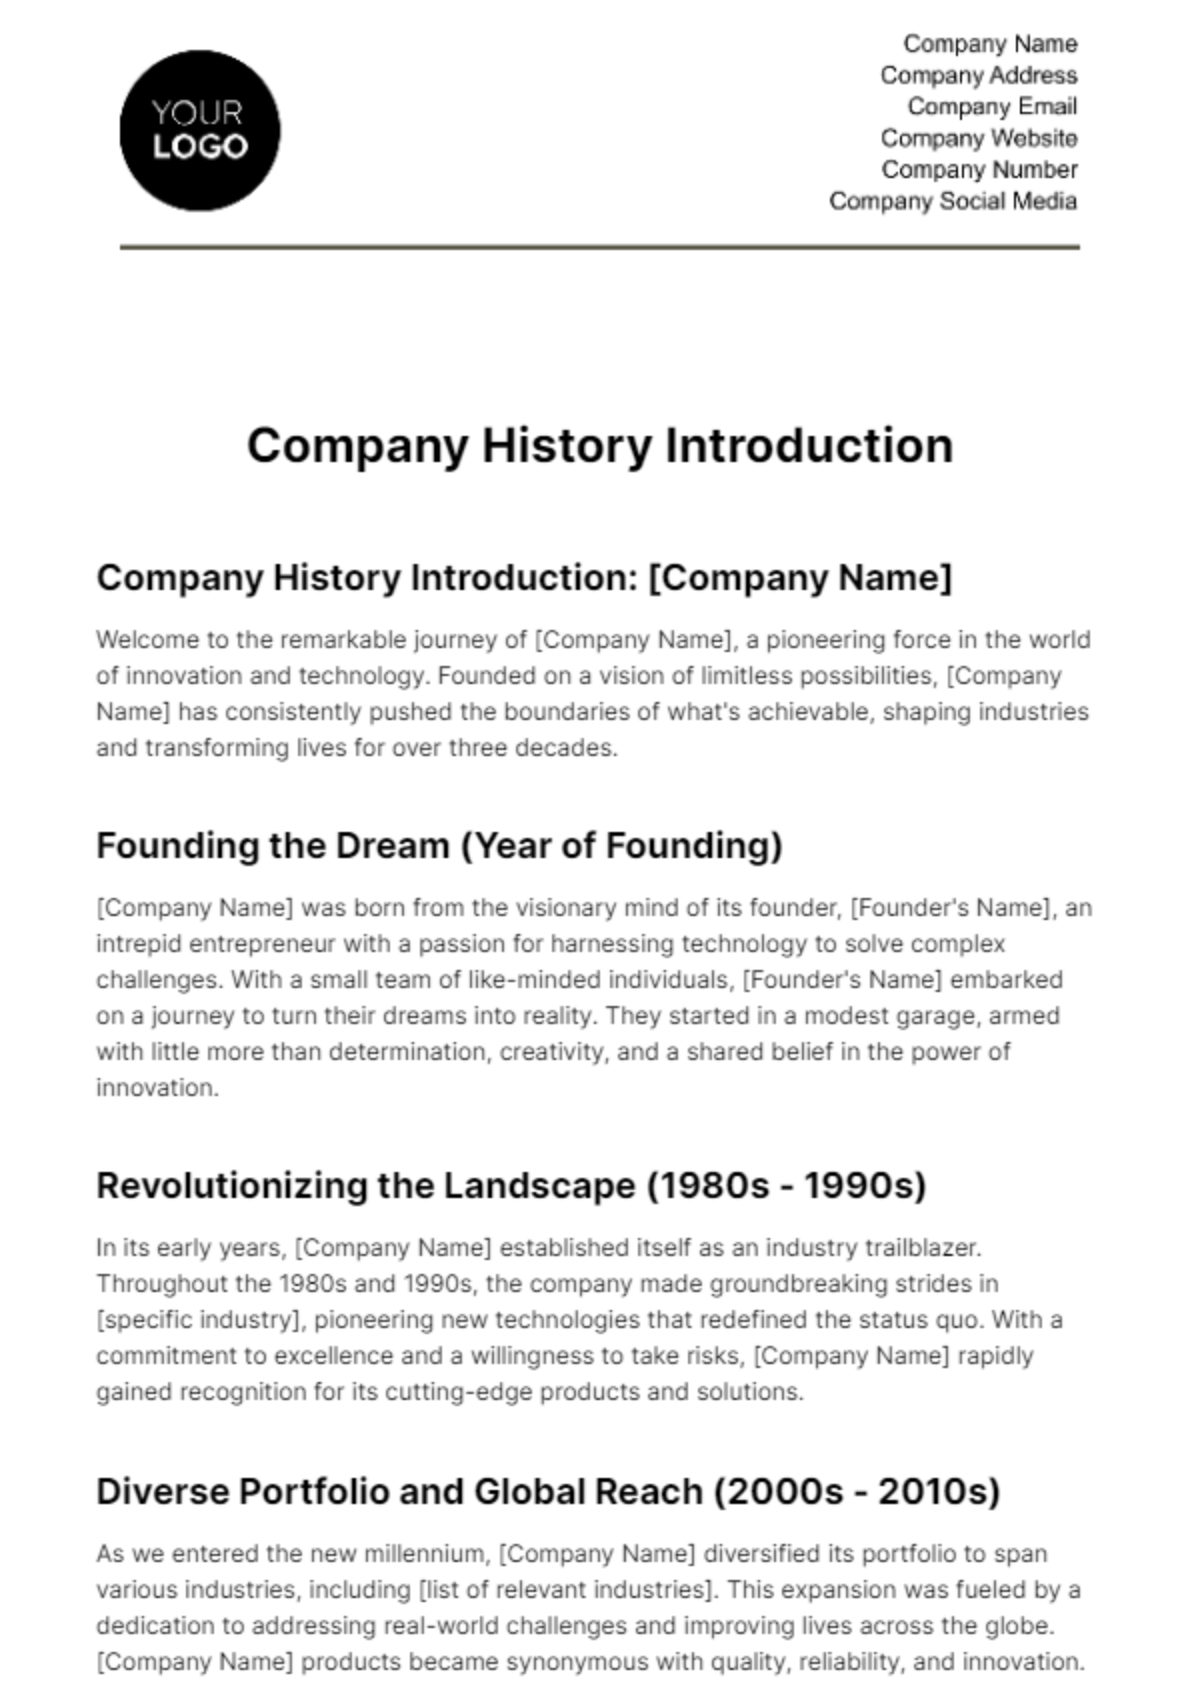 Company History Introduction HR Template